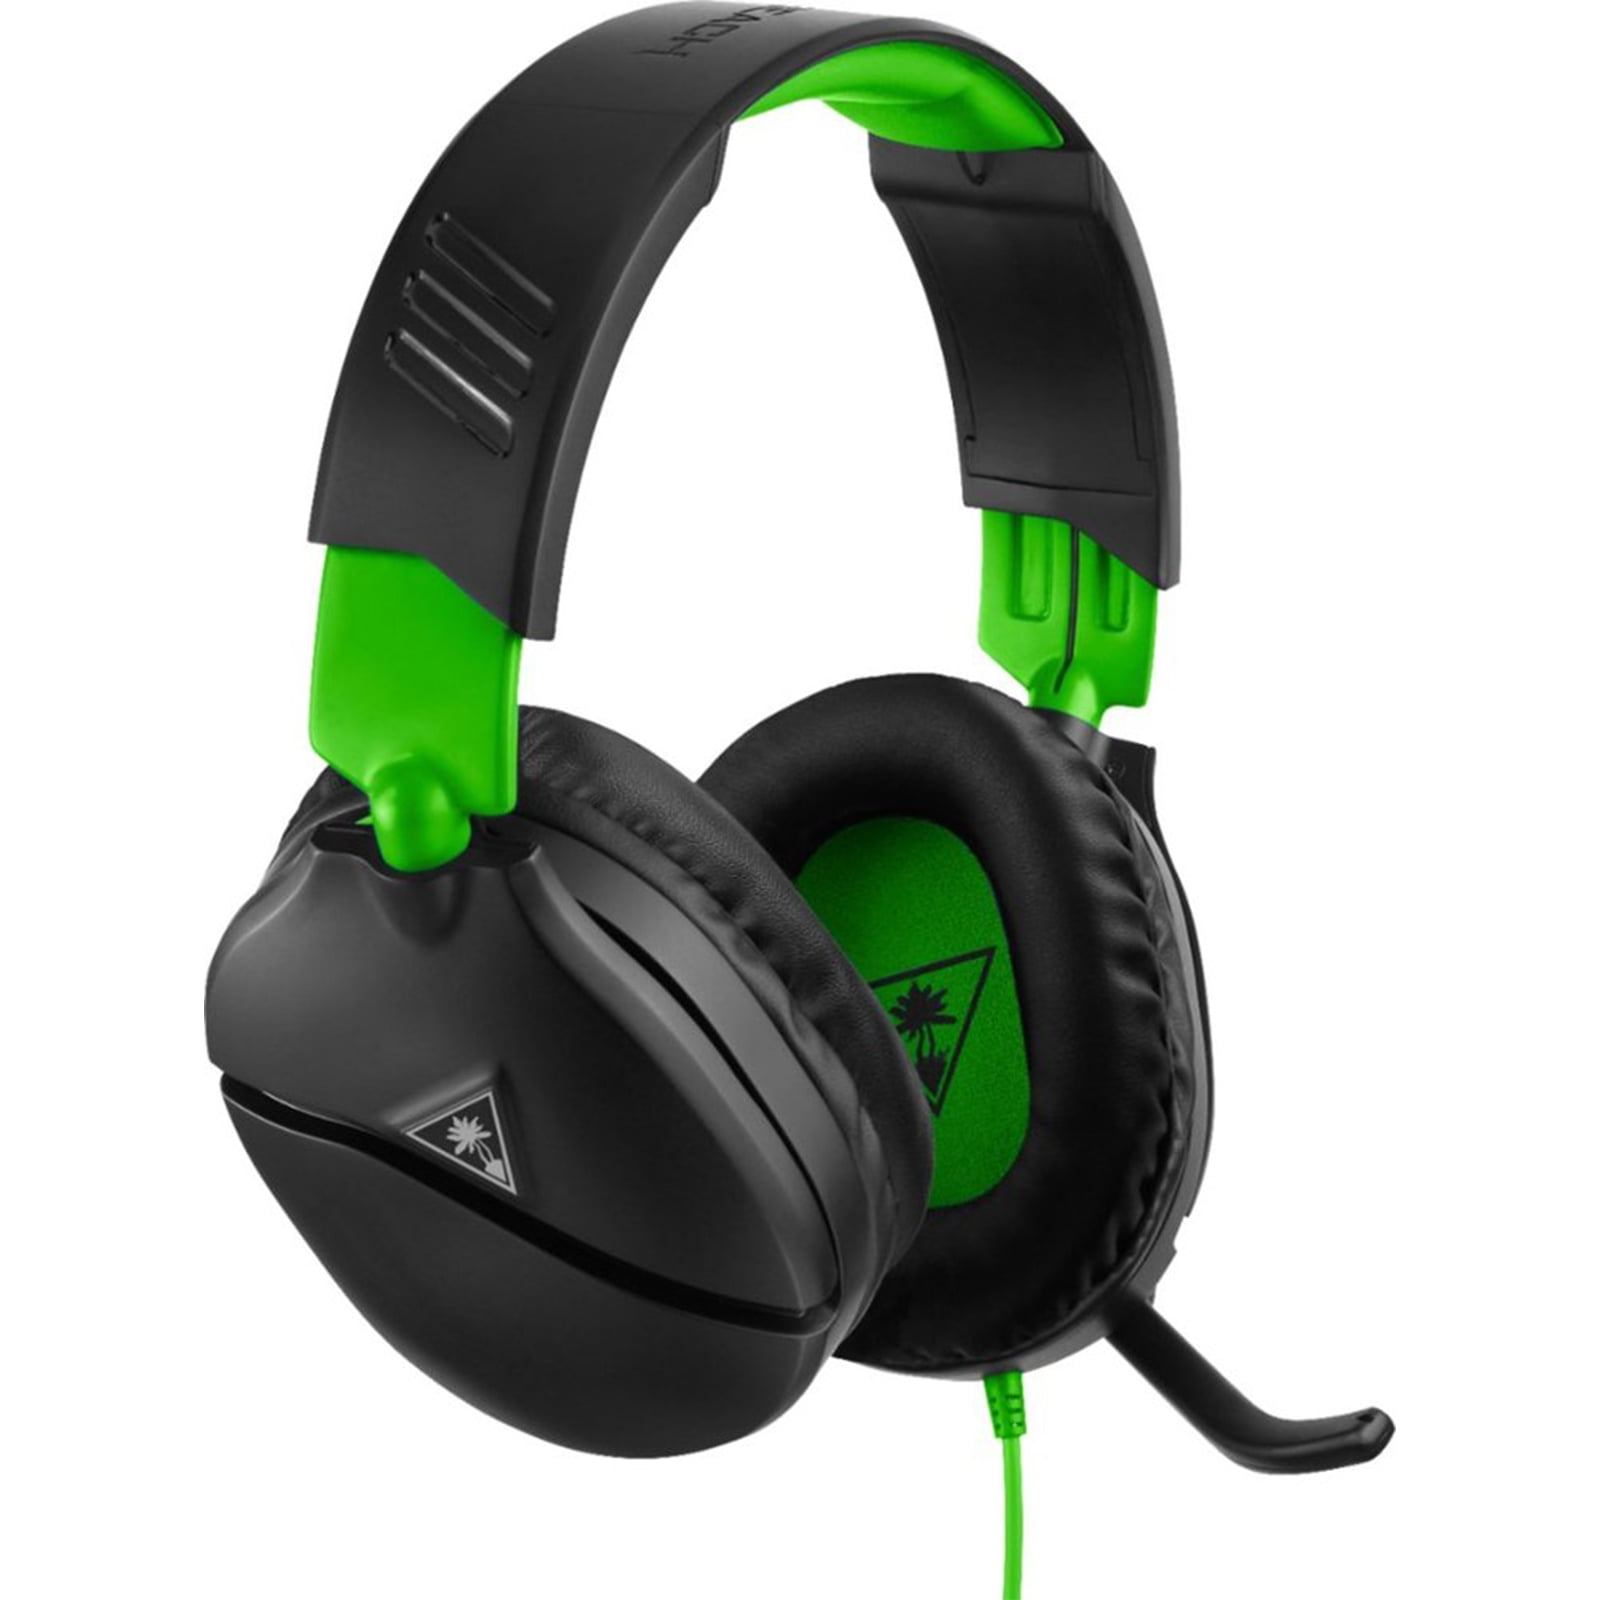 Soedan Defilé Slank Turtle Beach Recon 70 Xbox Gaming Headset for Xbox Series X, Xbox Series S, Xbox  One, PS5, PS4, PlayStation, Nintendo Switch, Mobile, & PC with 3.5mm -  Flip-to-Mute Mic, 40mm Speakers -